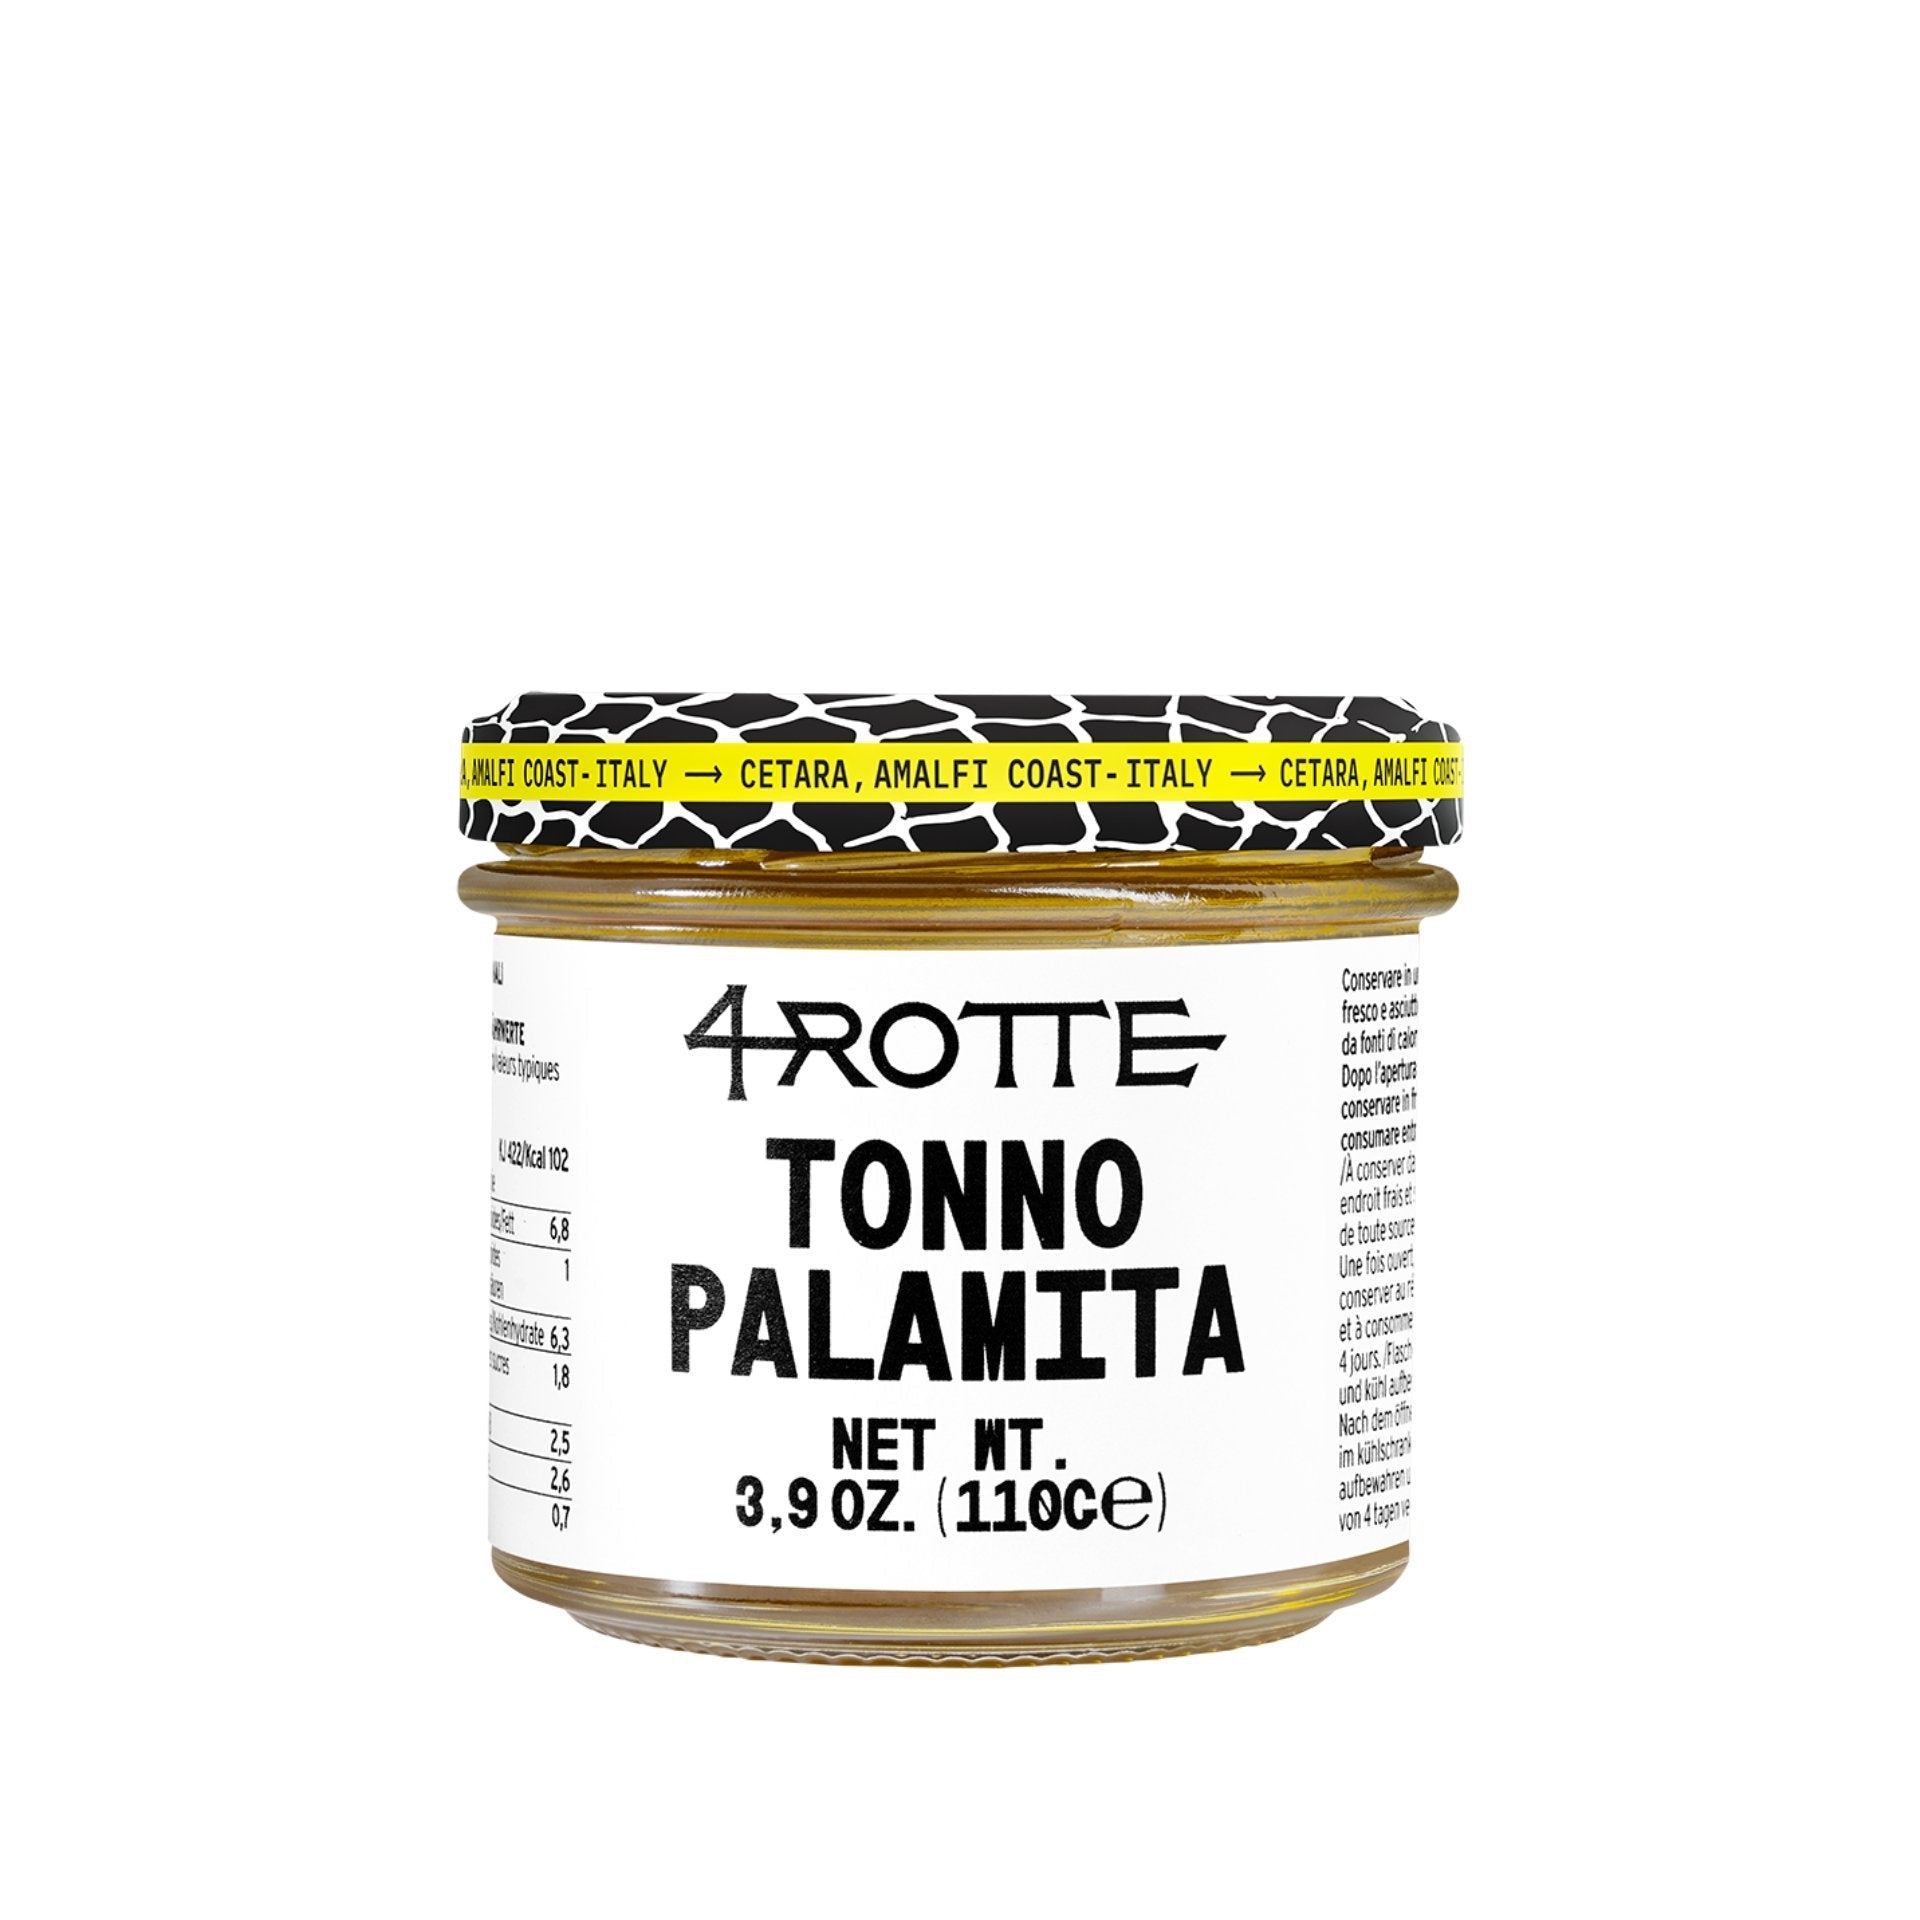 Armatore 4 Rotte Bonito in Olive Oil 110g  | Imported and distributed in the UK by Just Gourmet Foods